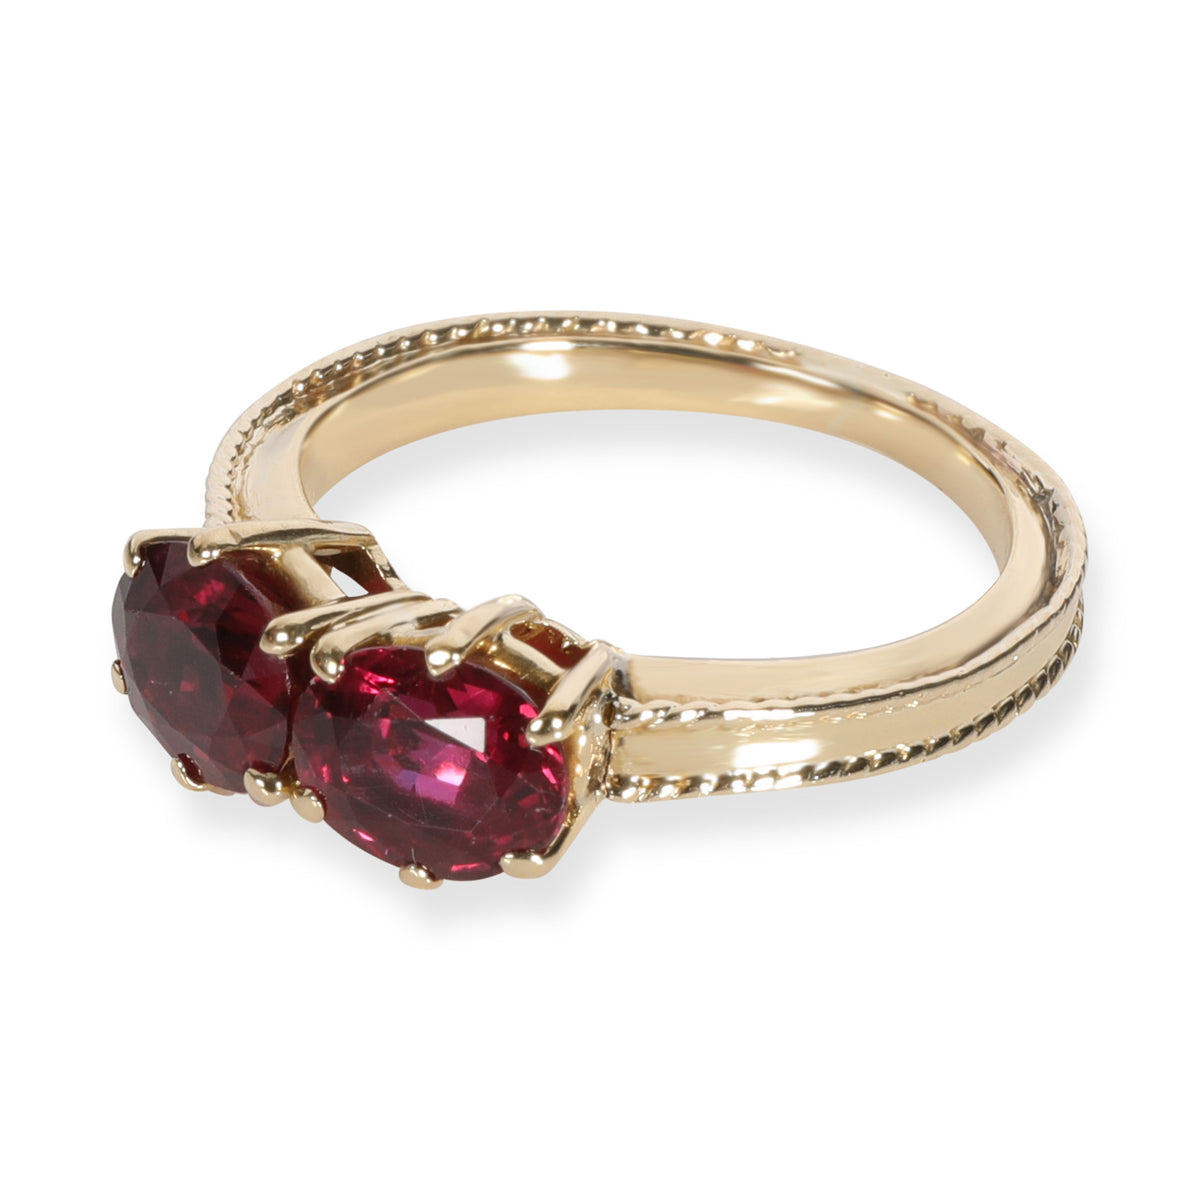 Tiffany & Co. Vintage Double Ruby Ring in 18K Yellow Gold